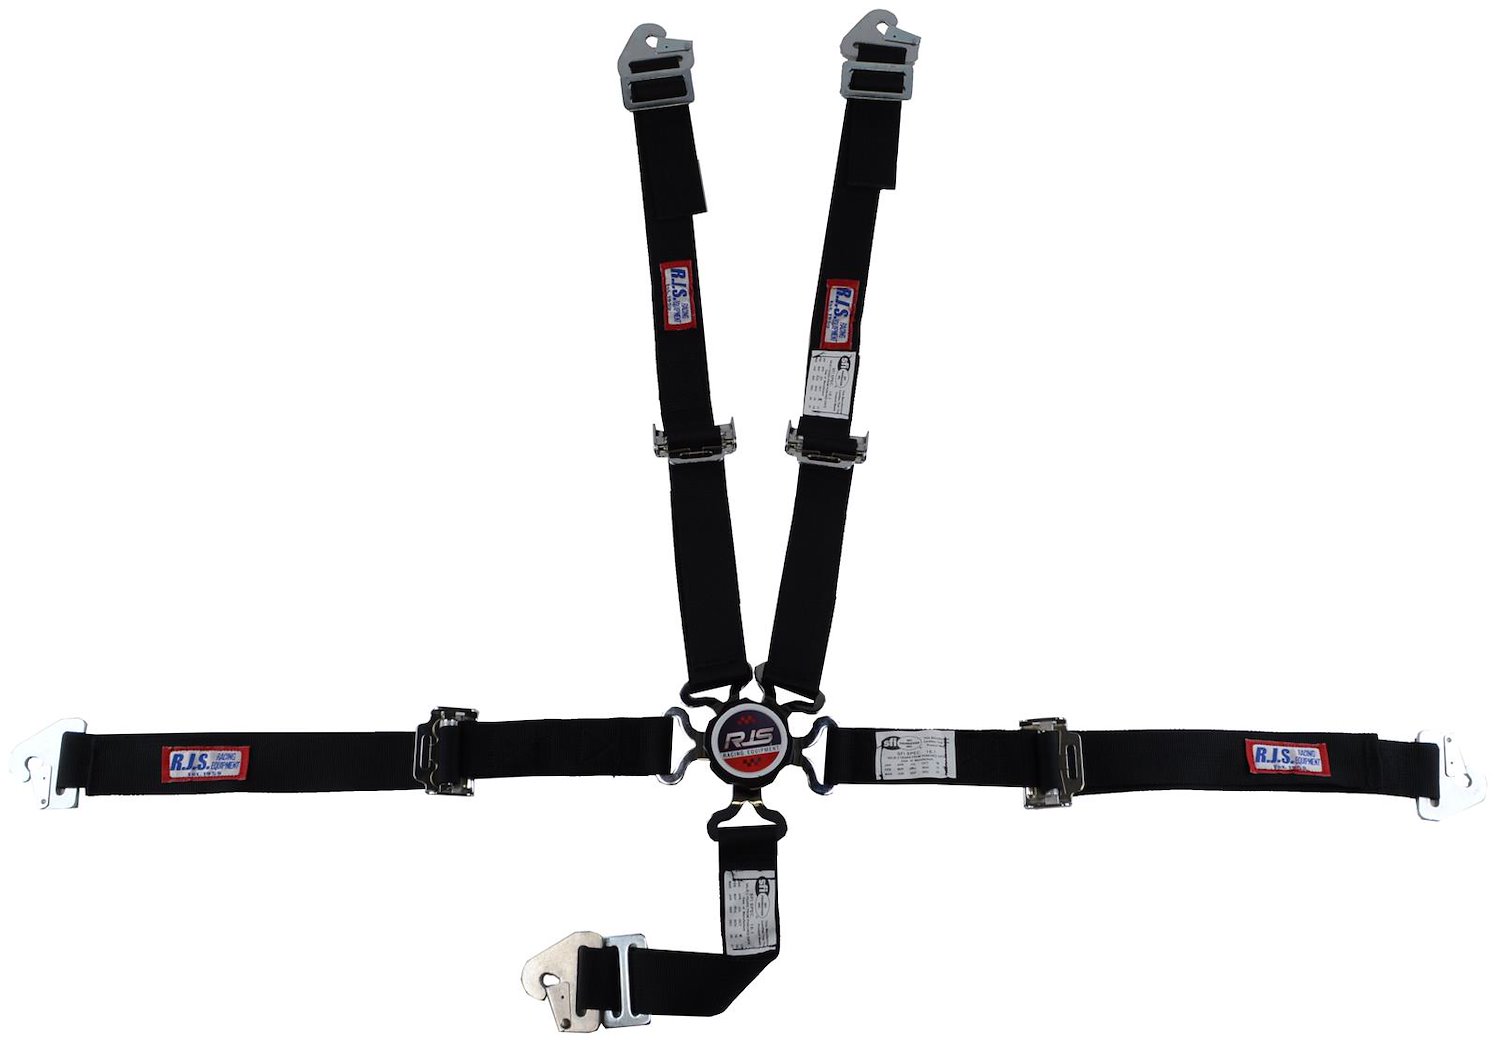 SFI 16.1 CAM-LOCK HARNESS 2 PULL UP Lap Belt 2 Shoulder Harness V ROLL BAR Mount 2 DOUBLE Sub ALL SNAP ENDS PURPLE